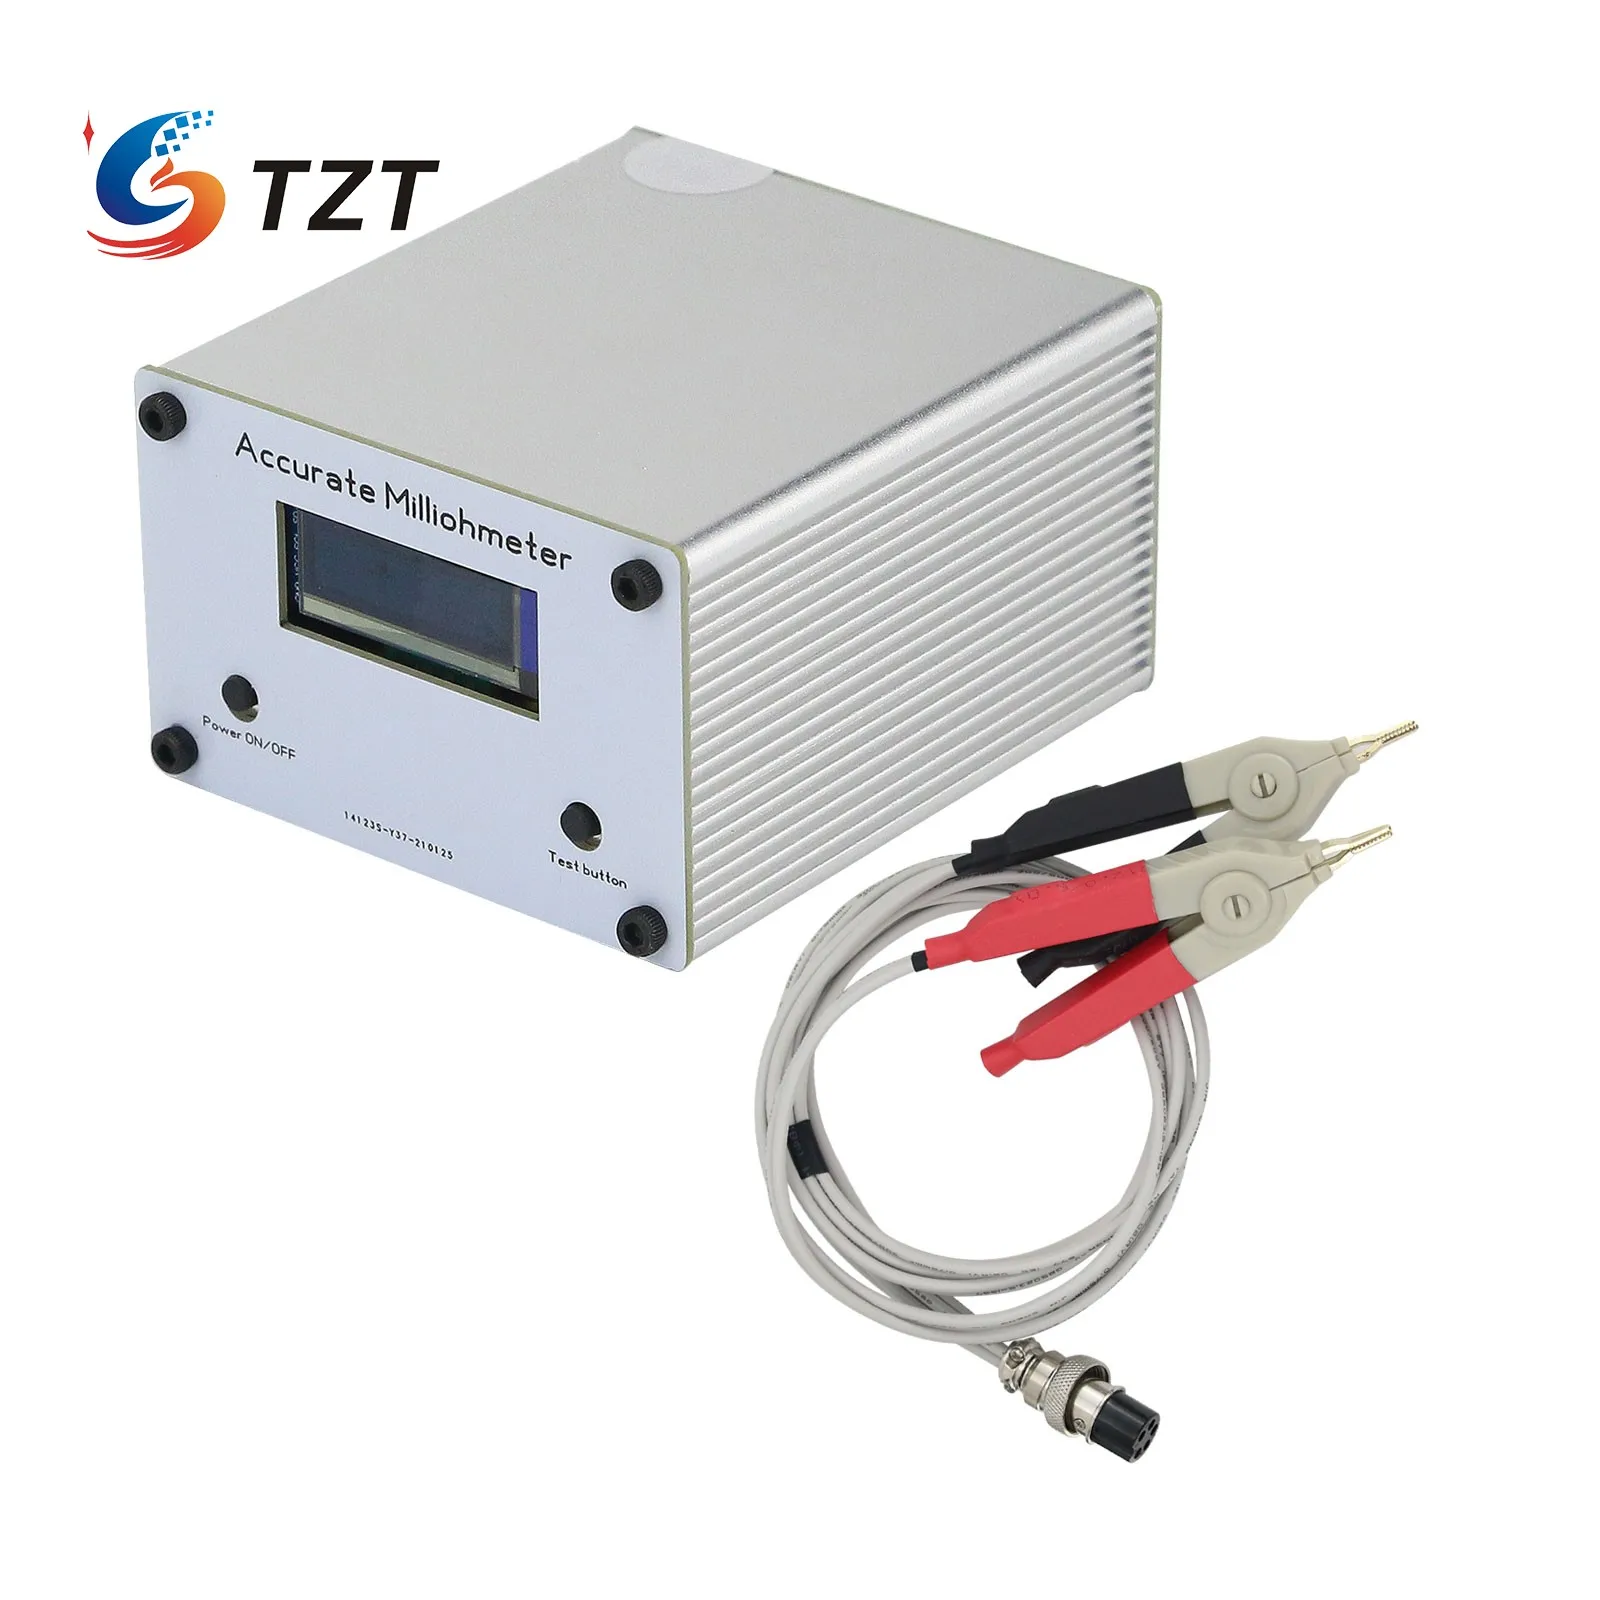 

TZT High-Precision Resistance Tester Milliohm Meter Accurate Milliohmmeter USB Charging With OLED 128*32